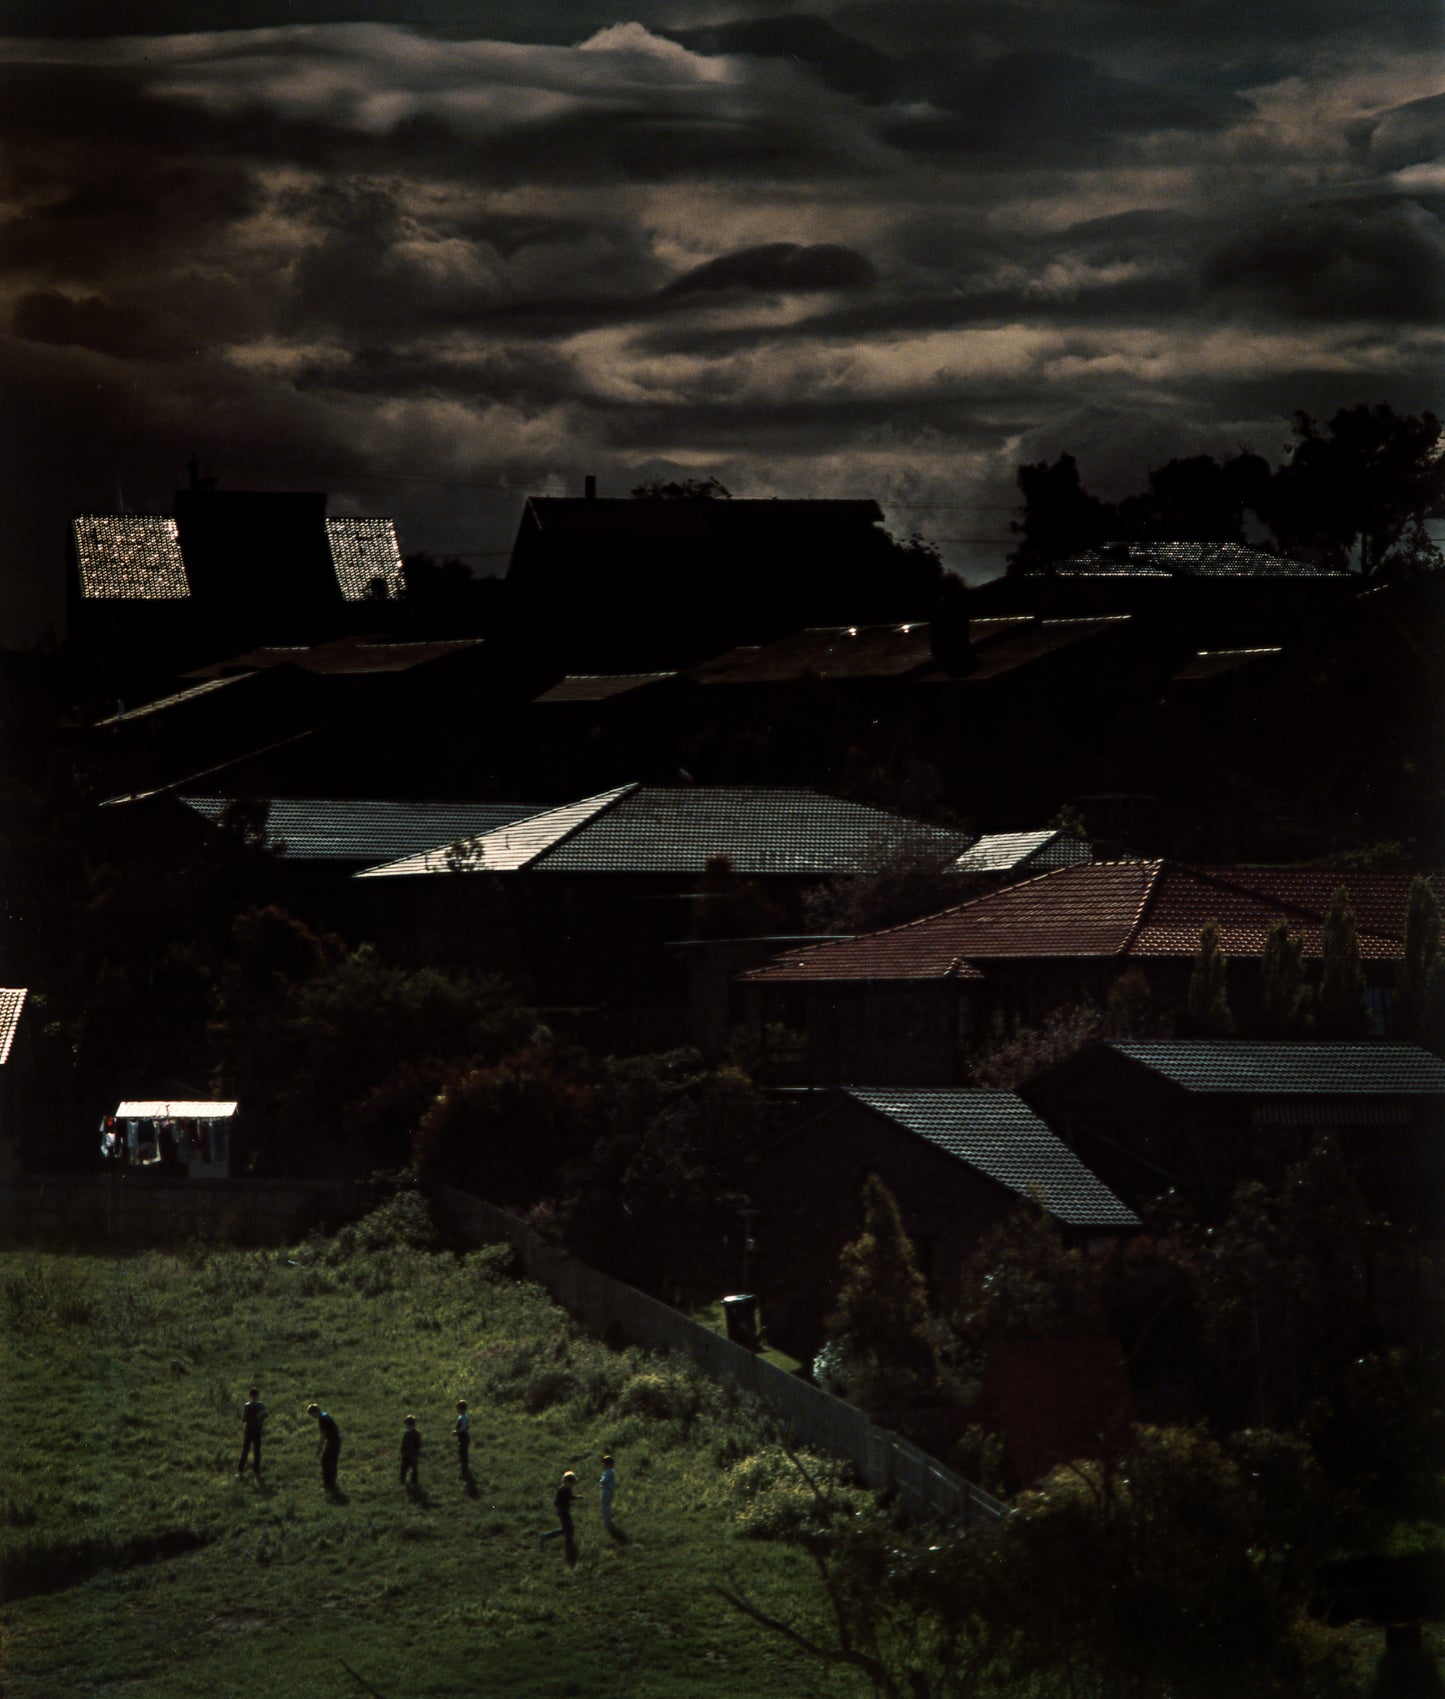 Bill Henson: The light fades but the gods remain